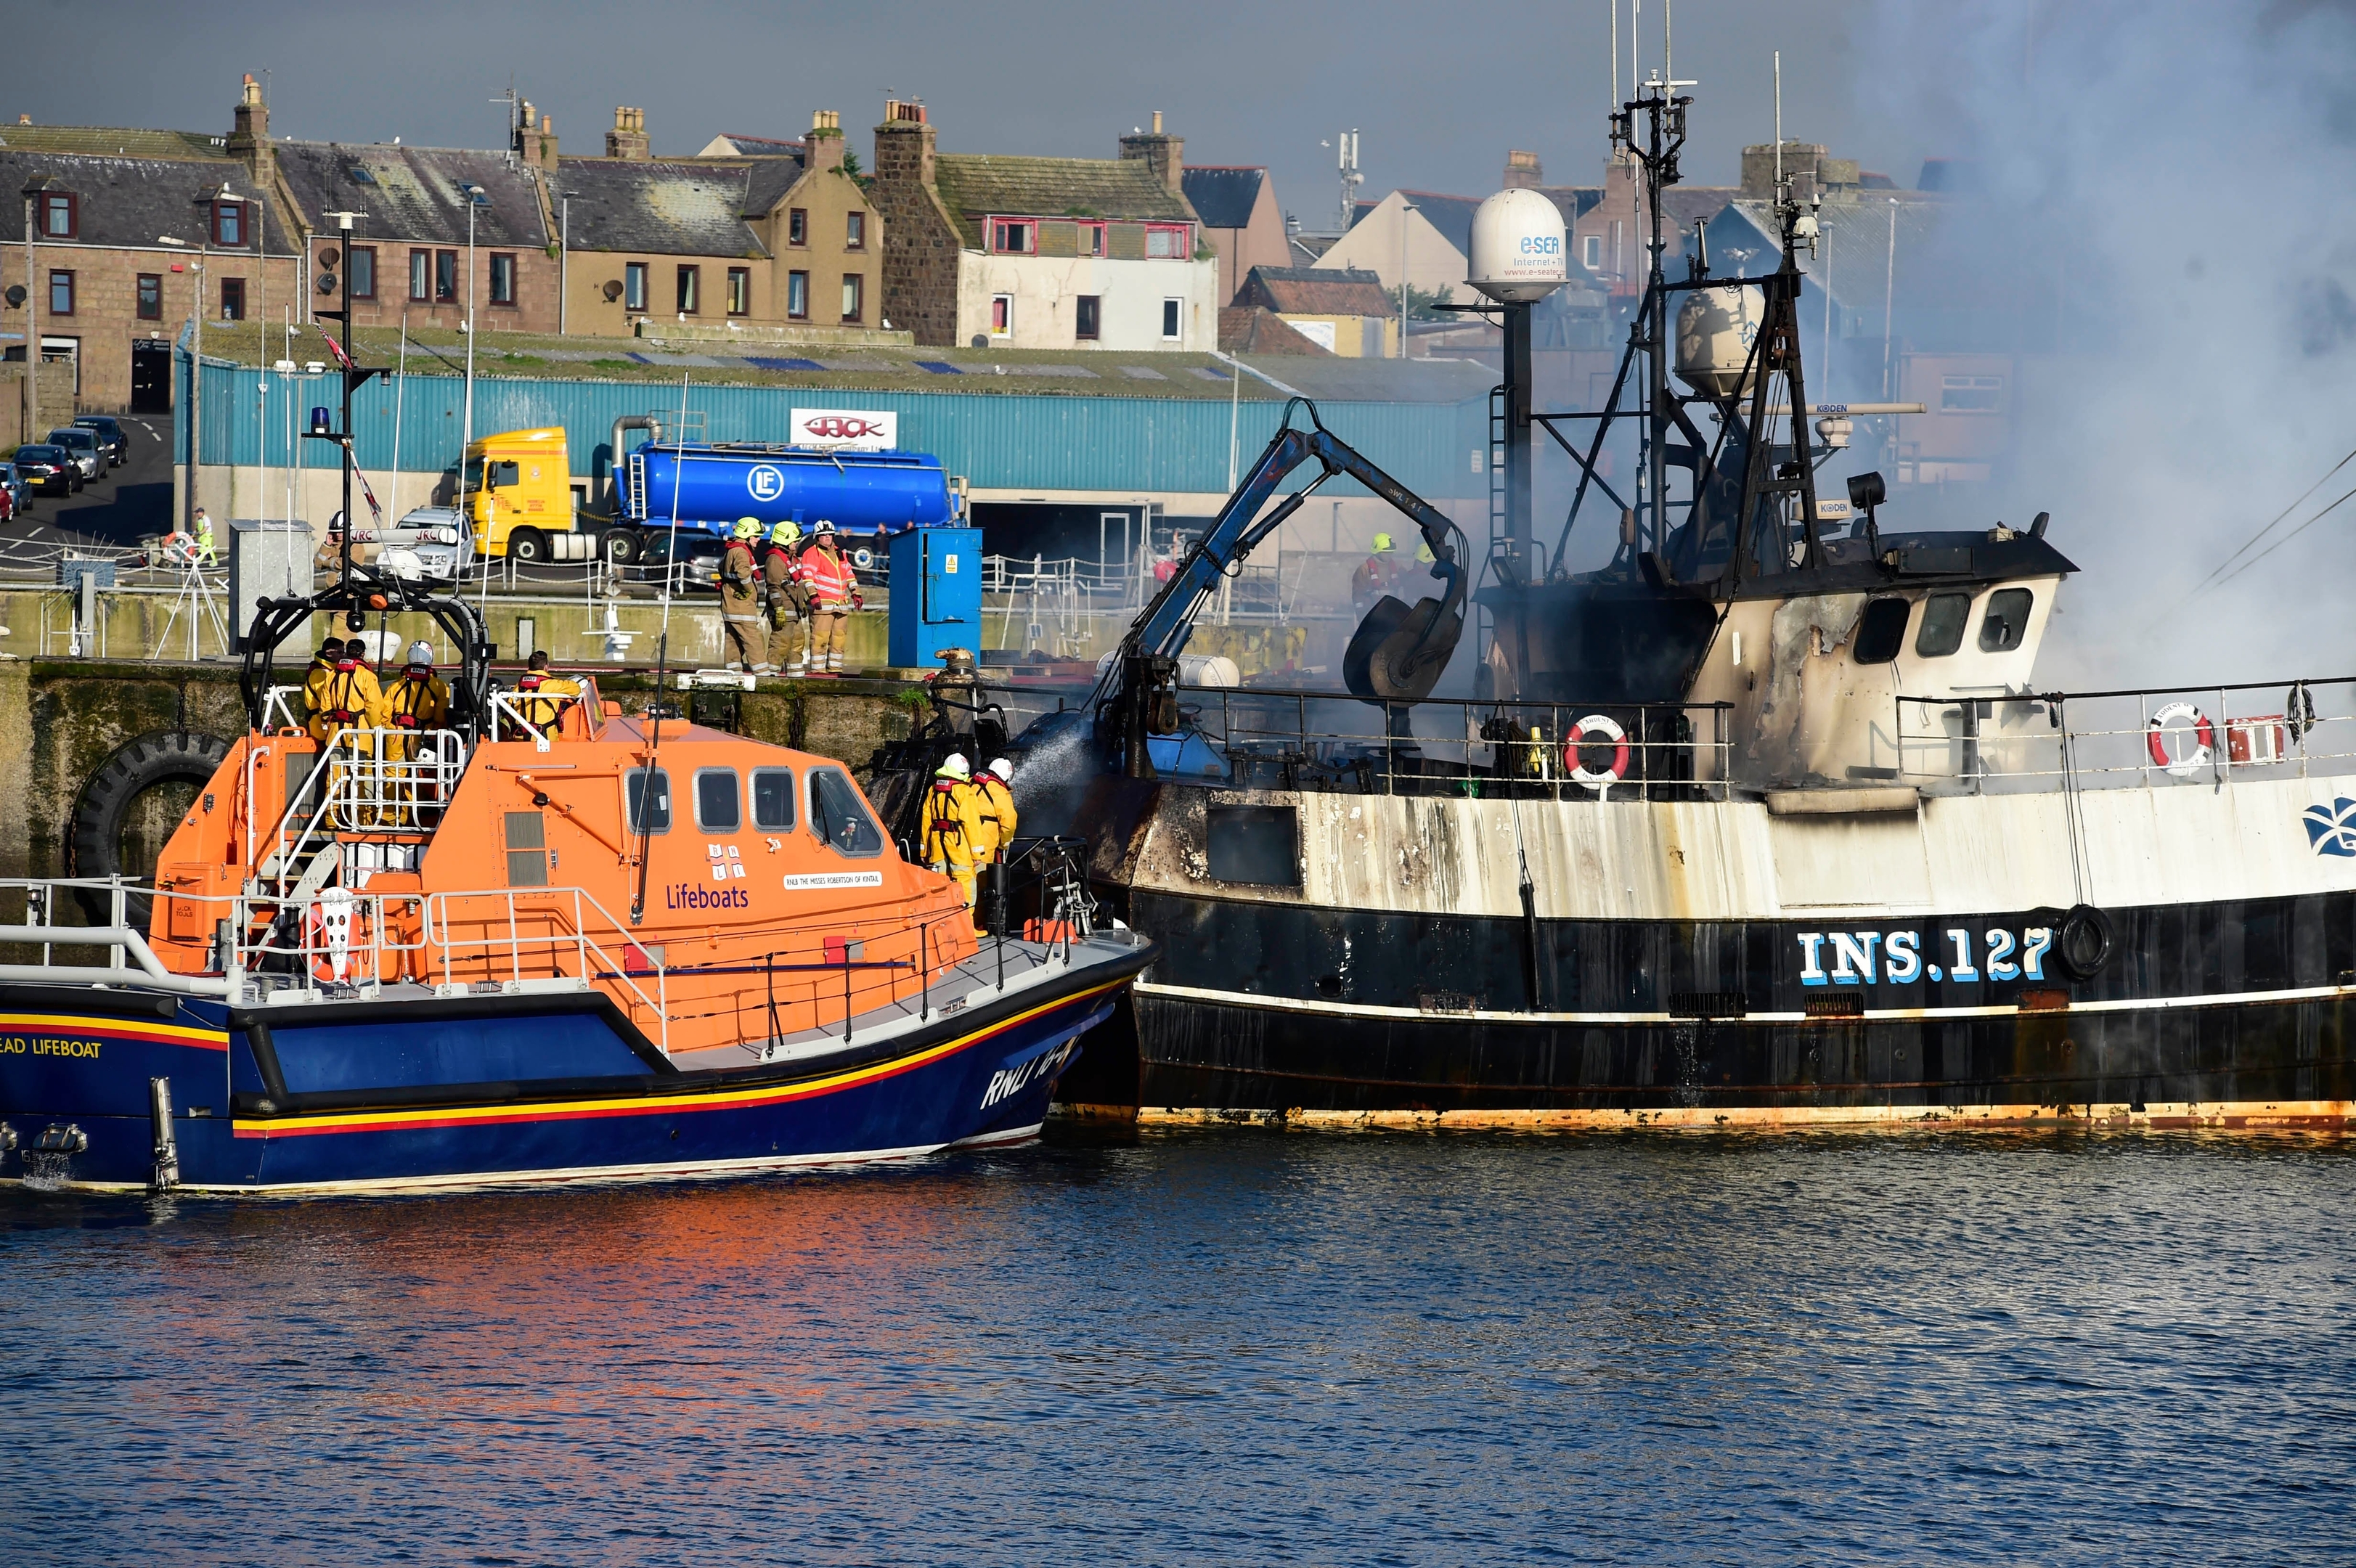 THE BOAT ON FIRE IN PETERHEAD HARBOUR